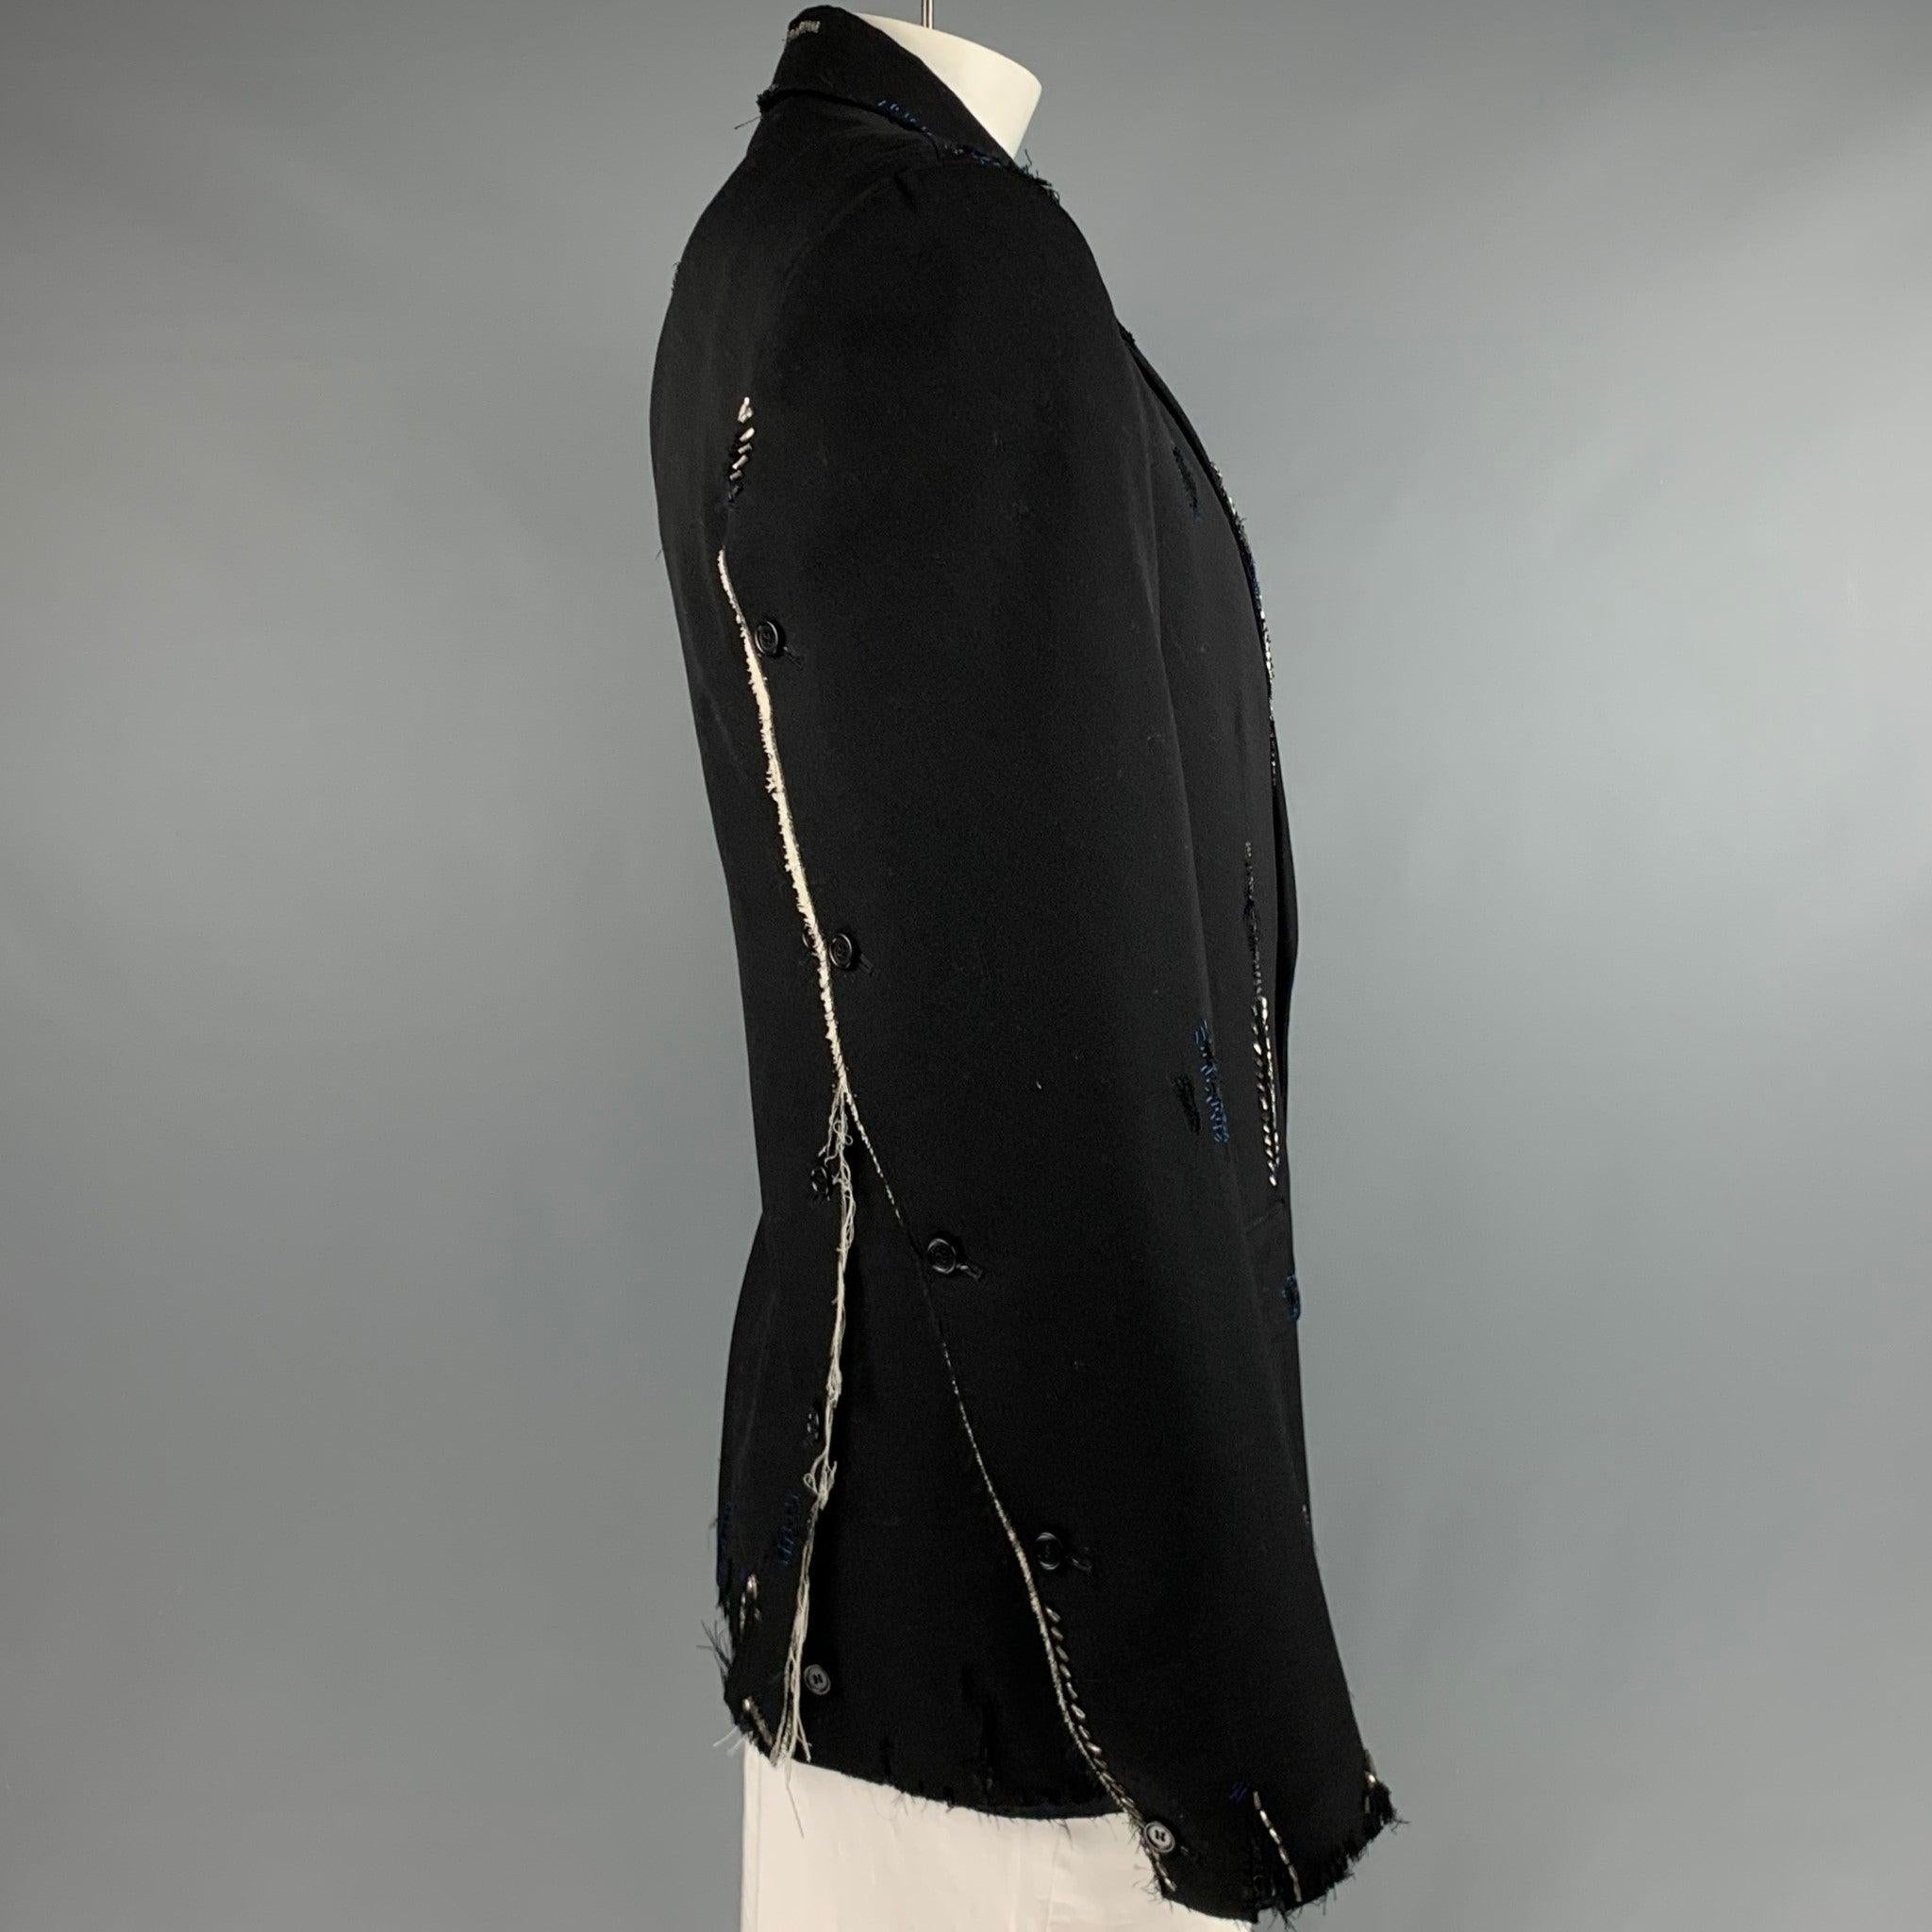 MARNI sport coat in a black wool fabric featuring distressed unfinished style with visible mending-style beading, notch lapel, and double button closure. Sleeves and back unbutton all the way to shoulder, converting the piece to a stunning and